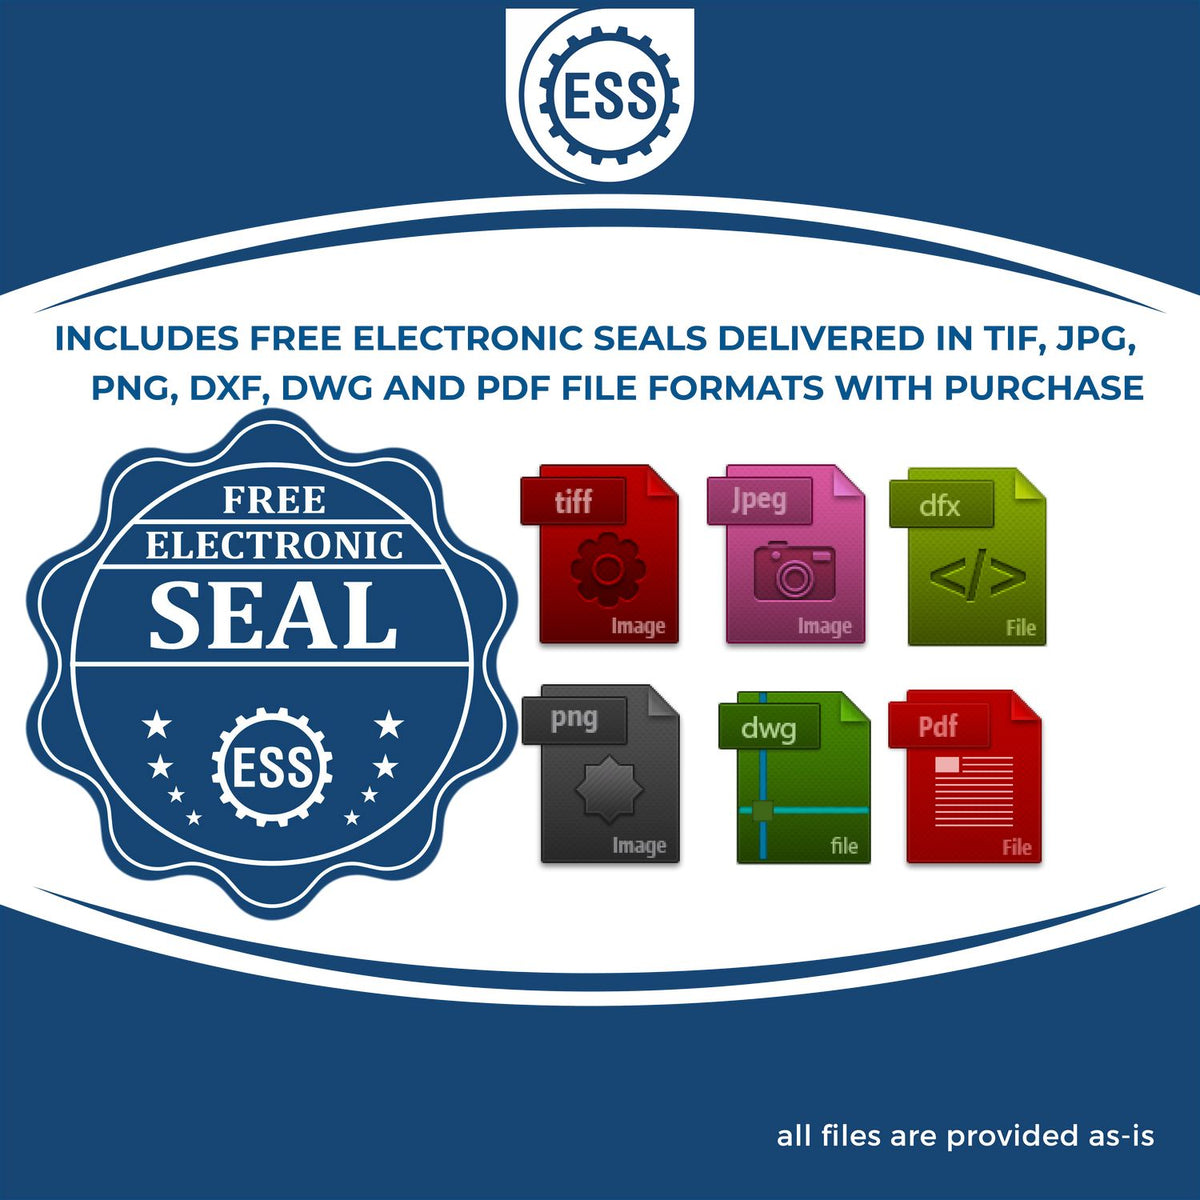 An infographic for the free electronic seal for the Heavy Duty Cast Iron Louisiana Land Surveyor Seal Embosser illustrating the different file type icons such as DXF, DWG, TIF, JPG and PNG.